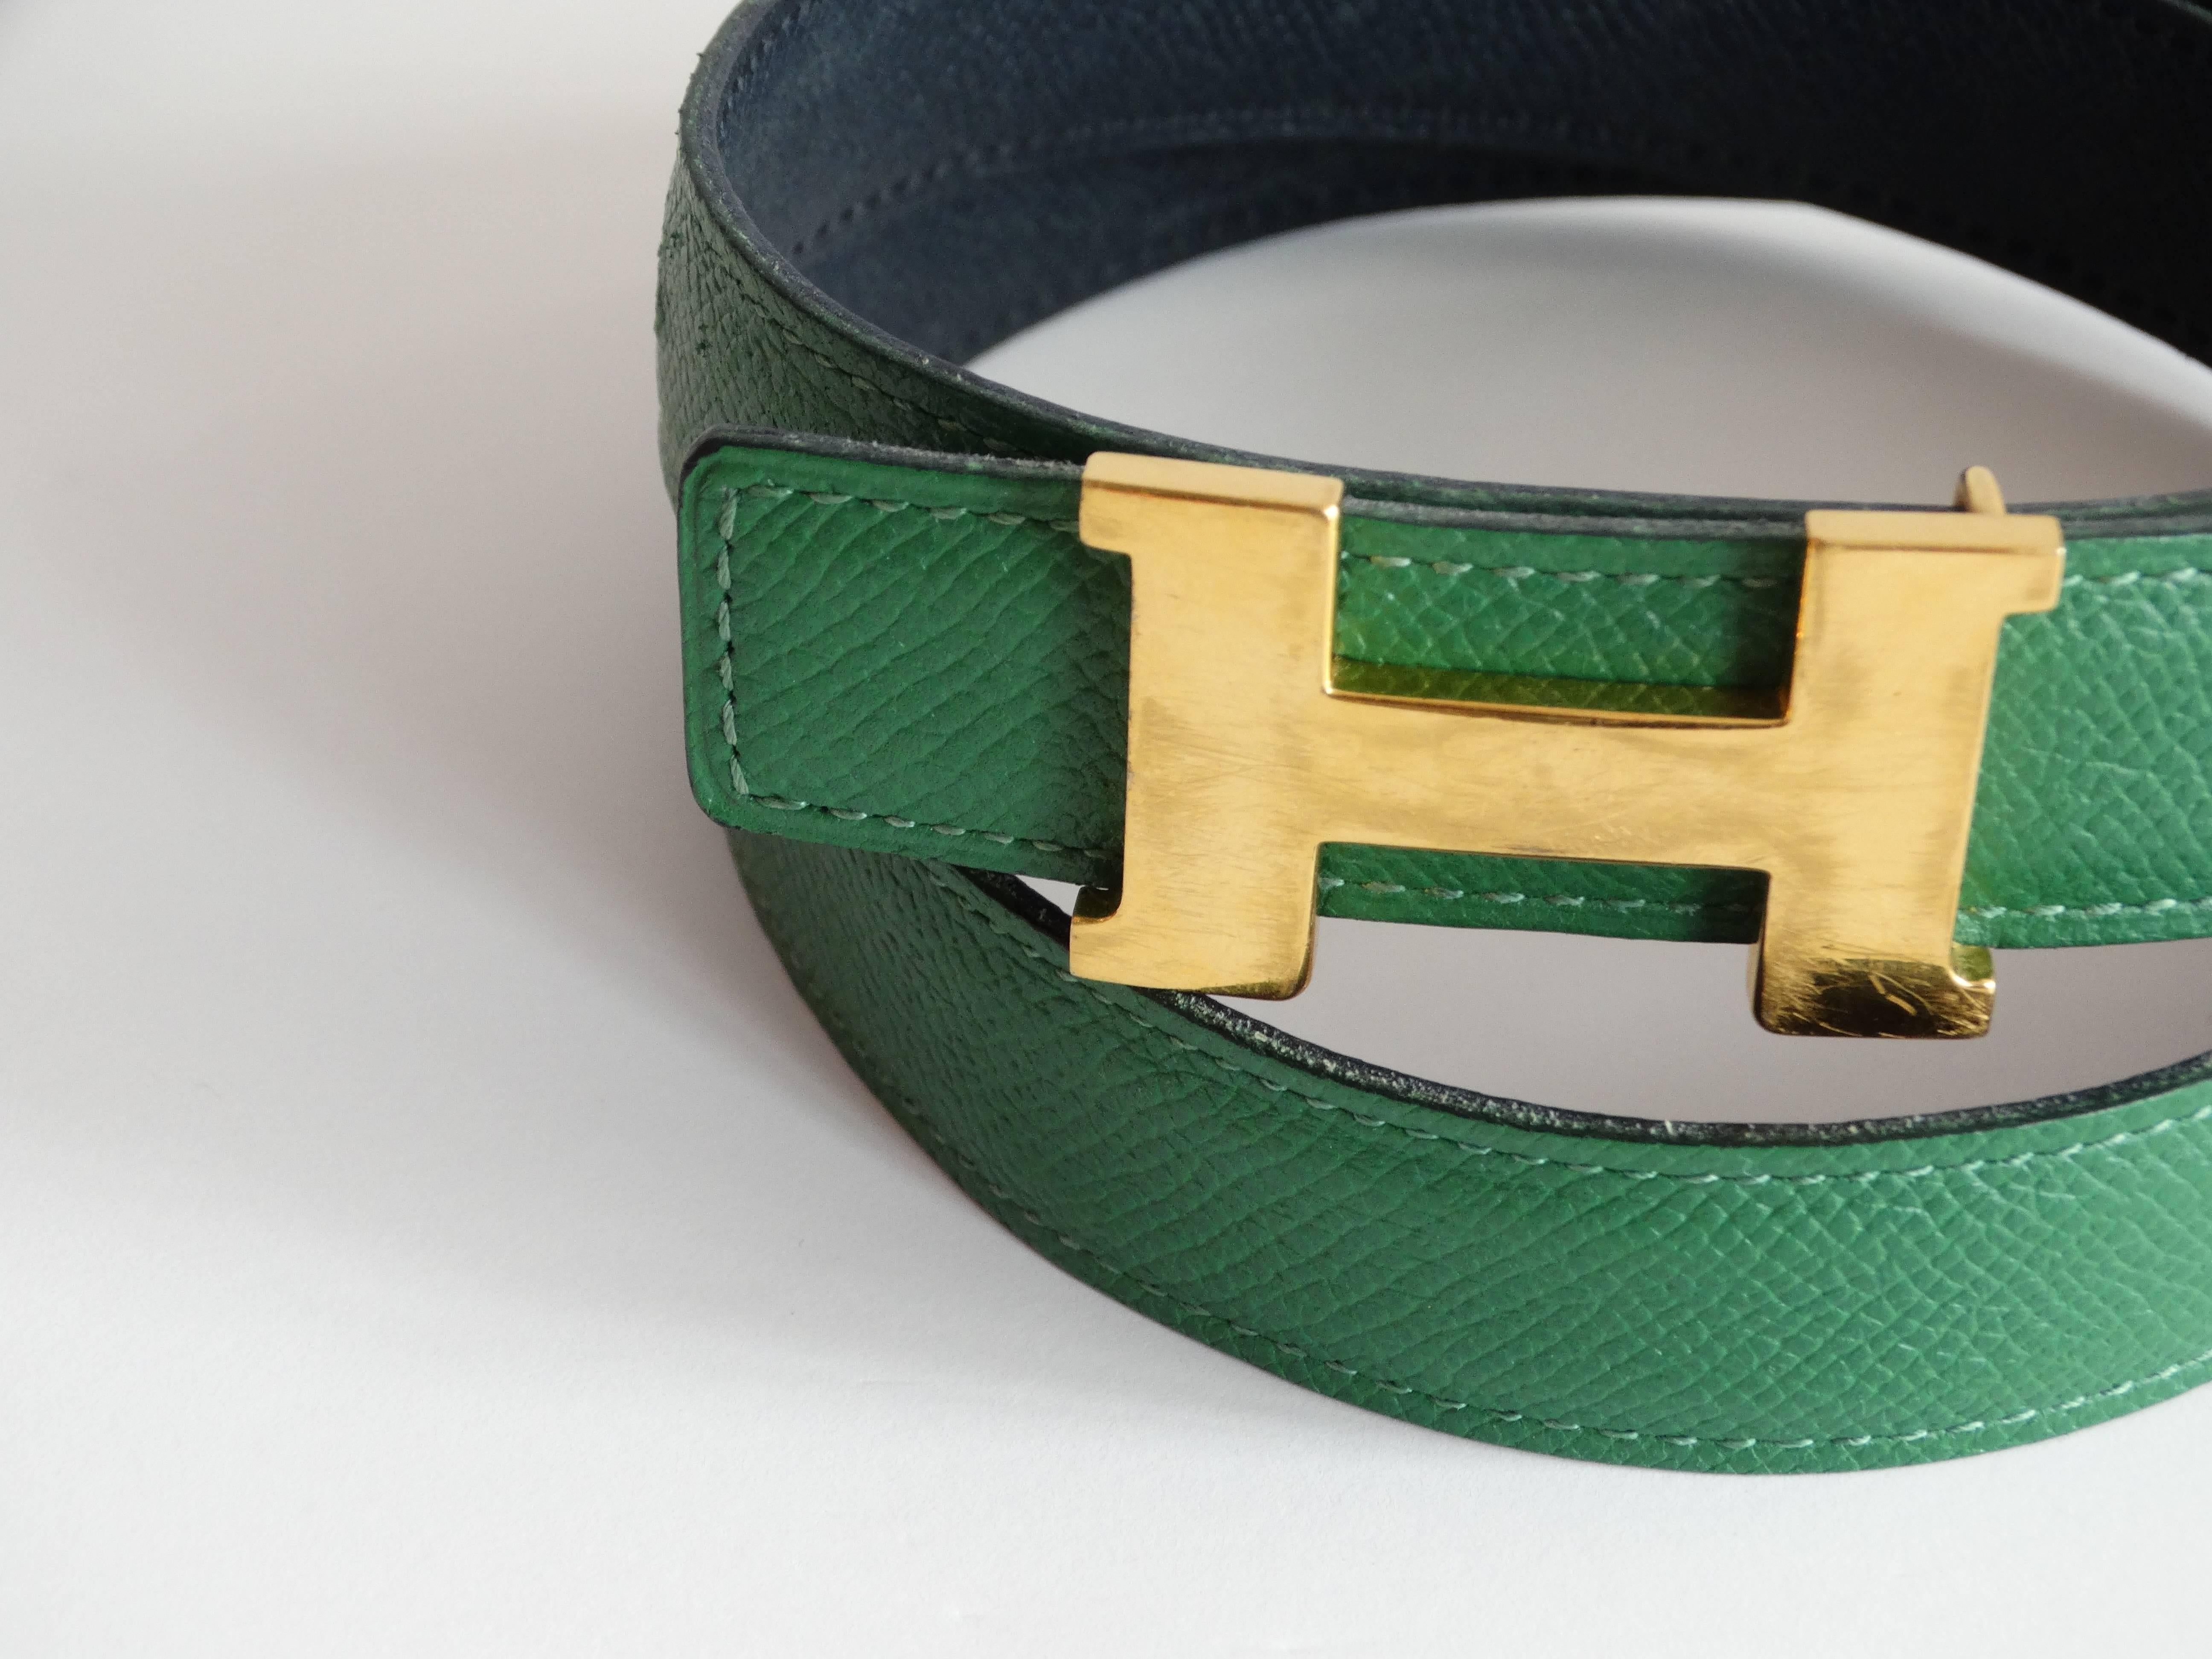 Kelly Green Hermes Constance H Belt. Gold H Hardware. Made in France. 
Marked a Size 72. Hermes signature (photograph in image #6) 24mm belt in green leather 

L 28”-30”
